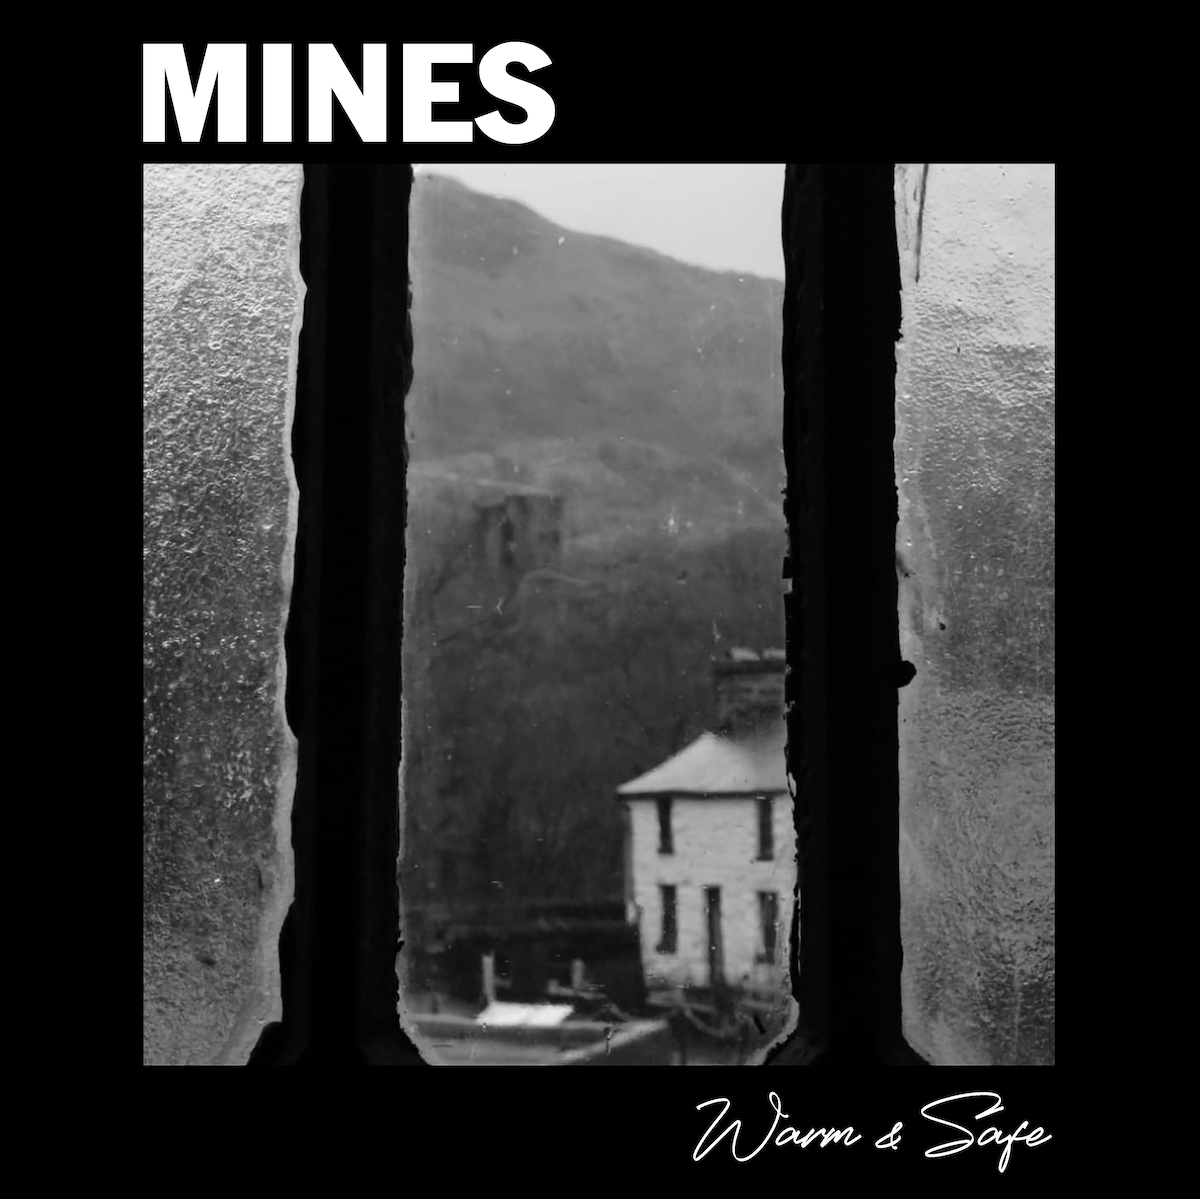 LISTEN: “My Heart is Willing” by Mines